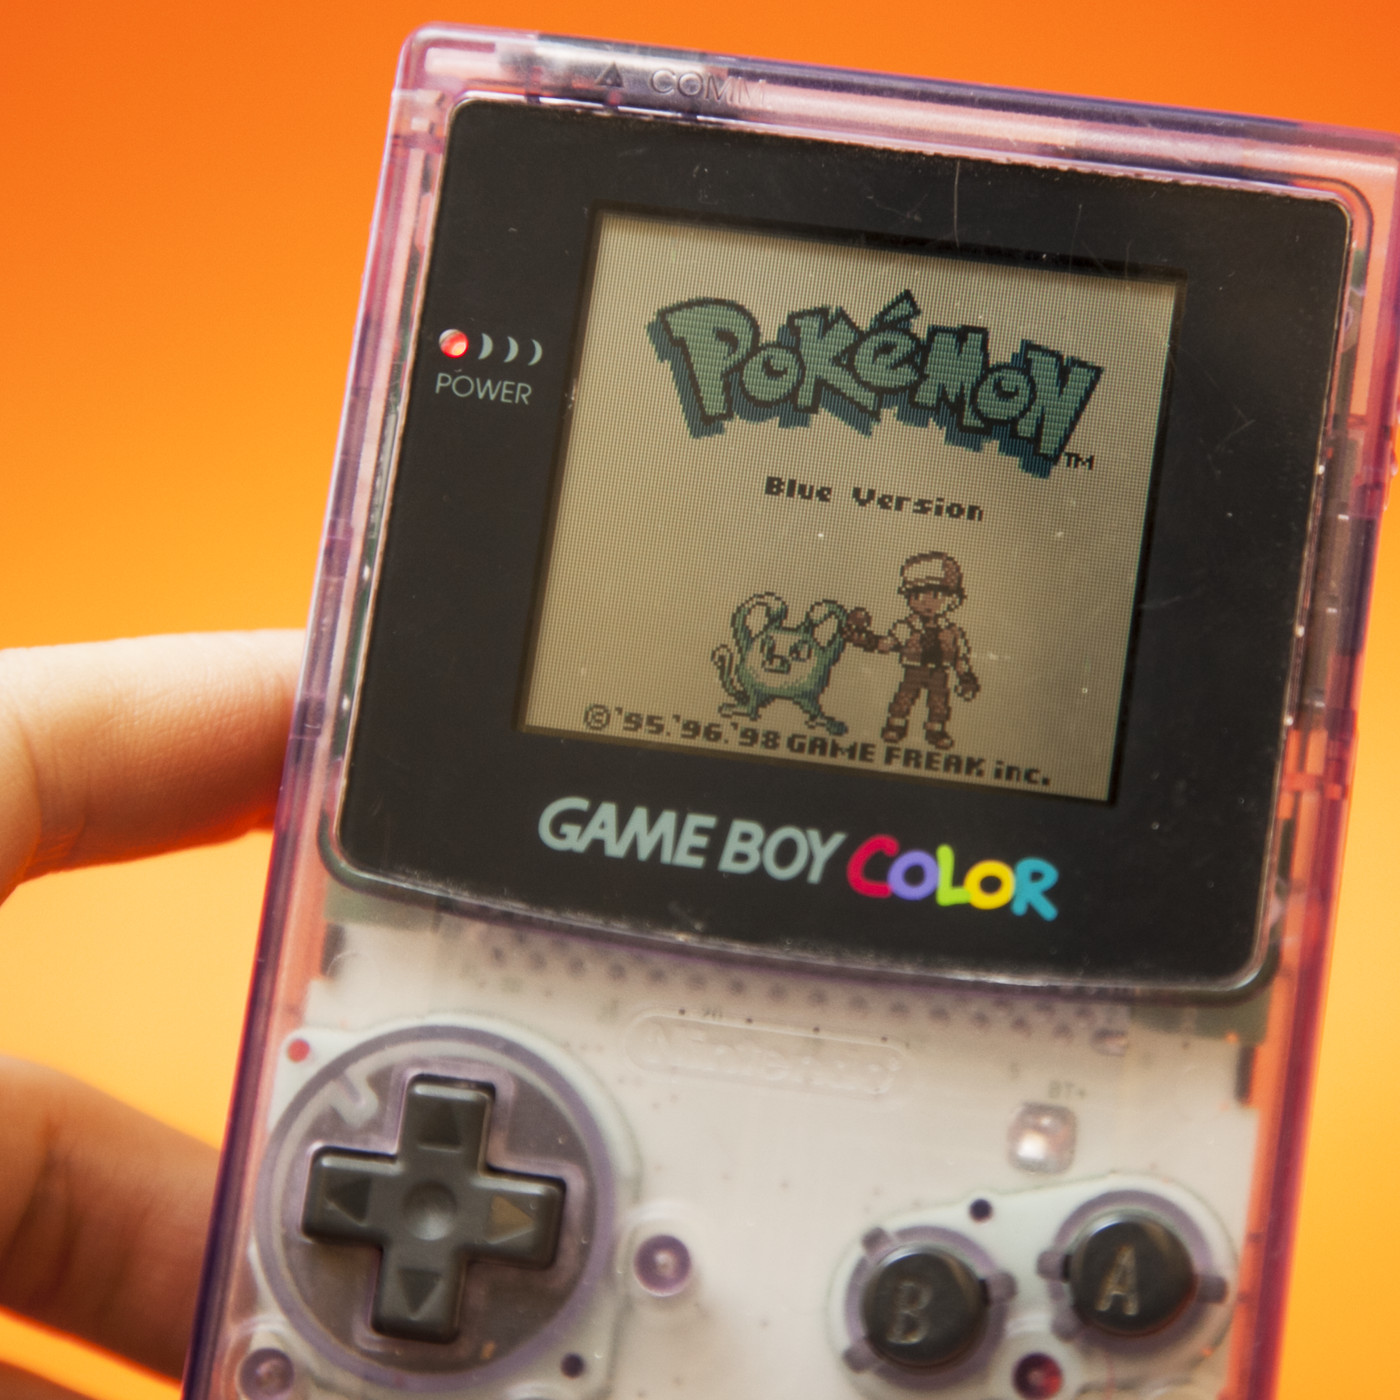 90s nostalgia - play pokemon red and blue gameboy - Va Comme Power Pokale M Blue Version @'95. 96. 98 Game Freak inc. Game Boy Color B